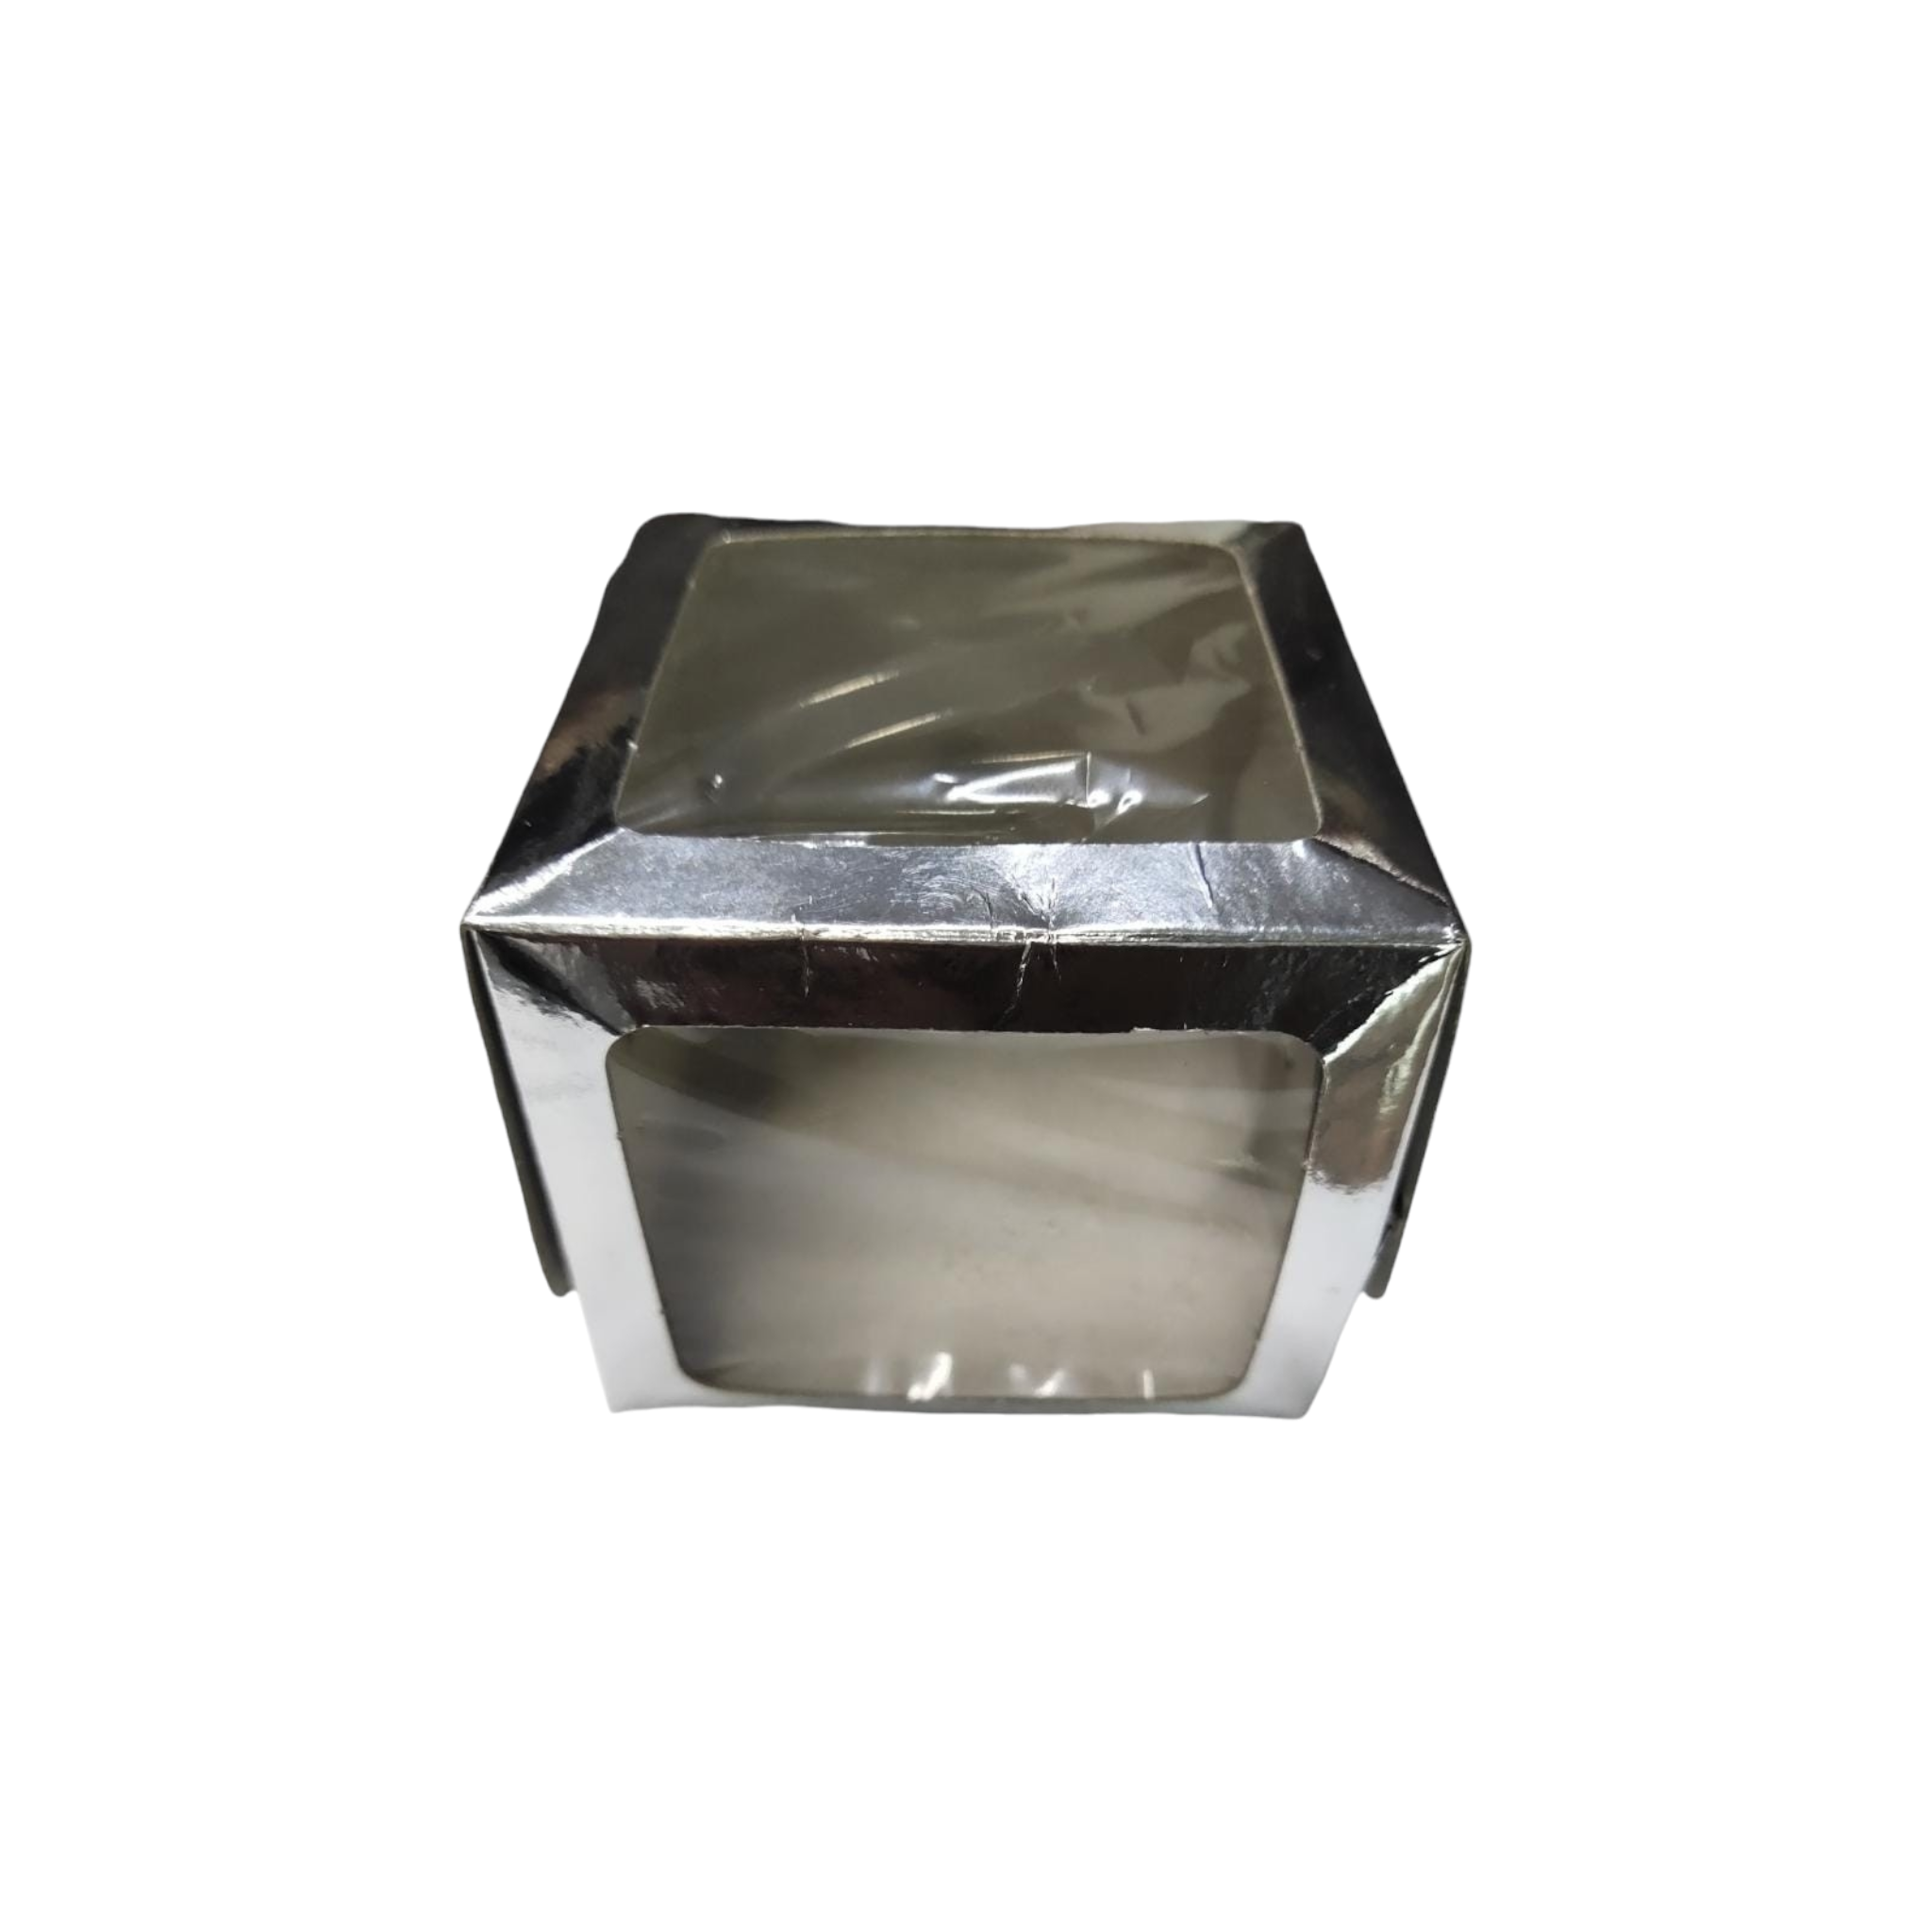 Muffin Cupcake Biscuit Cardboard Paper Cup Box with Window Silver or Gold